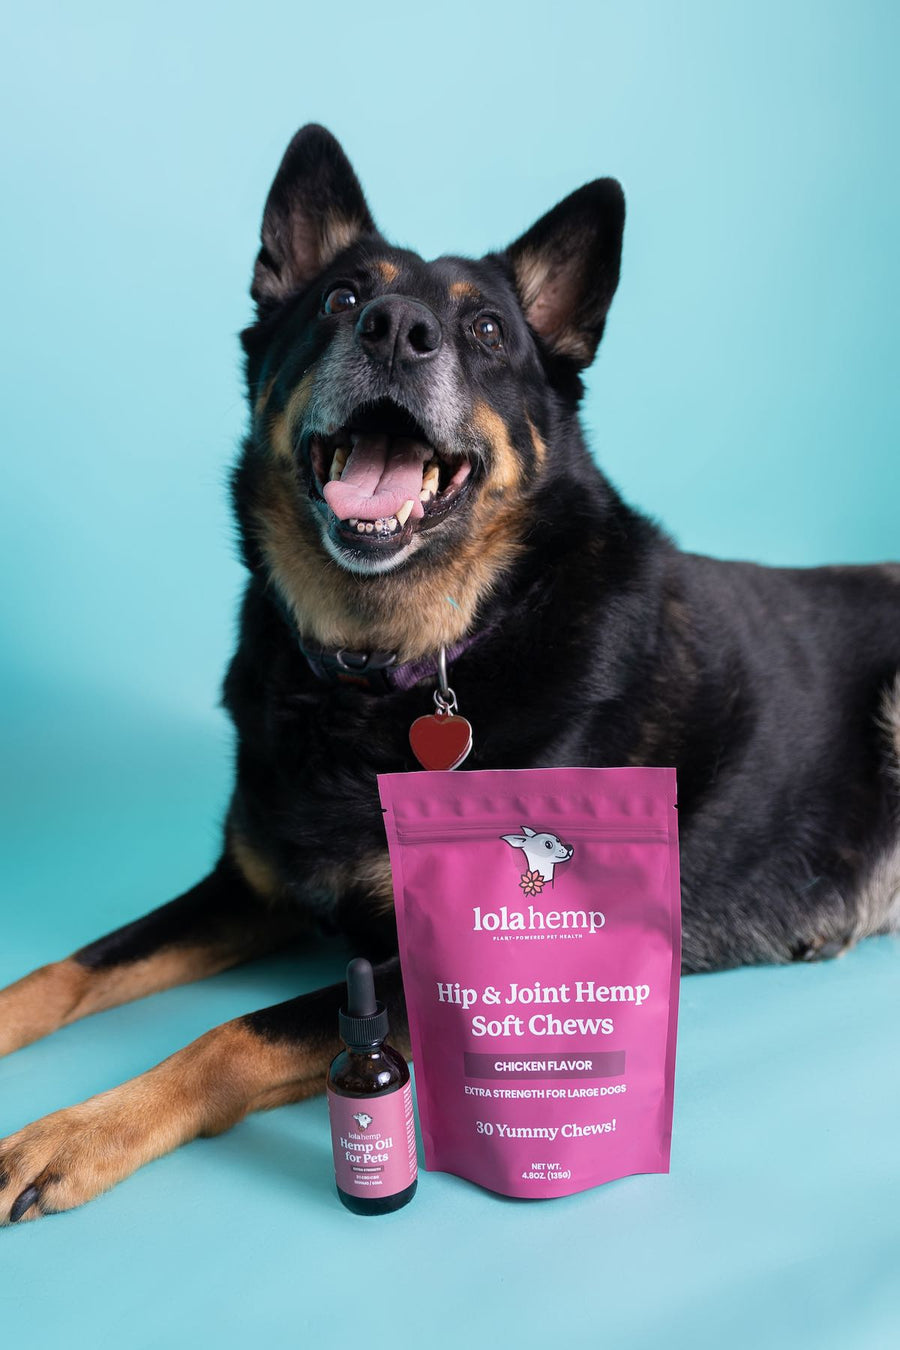 black and brown german shepherd sitting behind fuchsia colored bag of extra strength lolahemp hip & joint hemp soft chews and brown 1800mg extra strength lolahemp oil bottle with blue background